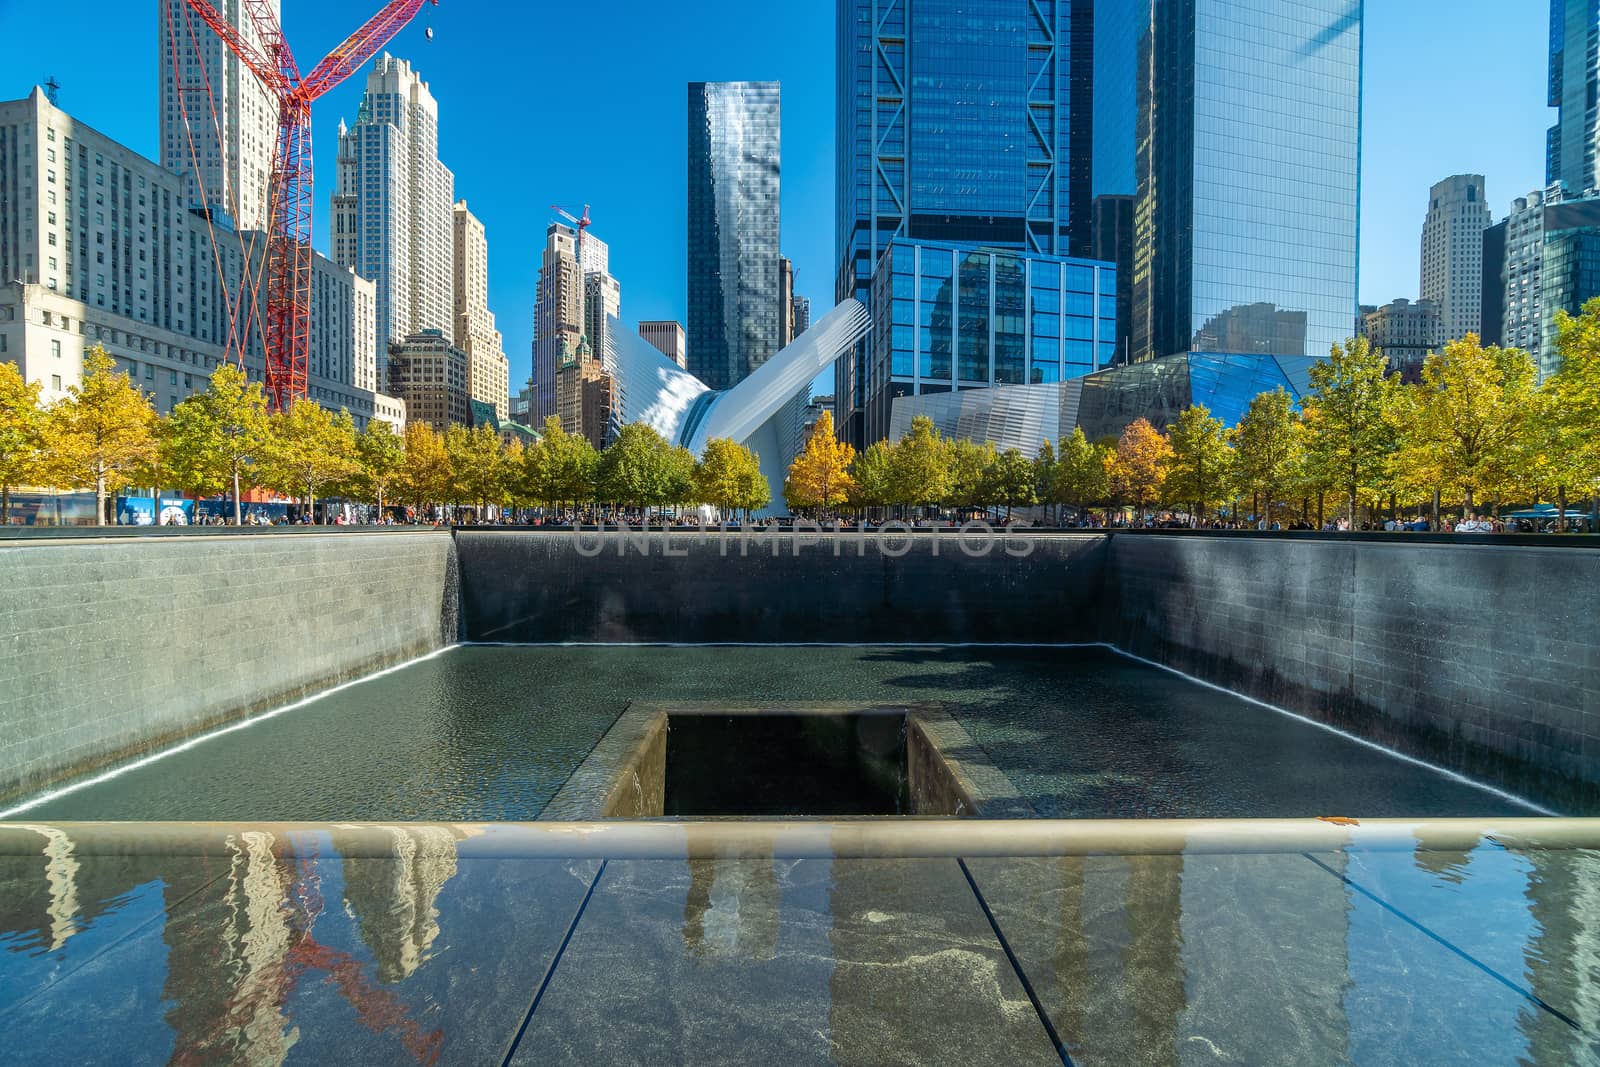 9/11 Memorial at World Trade Center Ground Zero in downtown Manh by f11photo